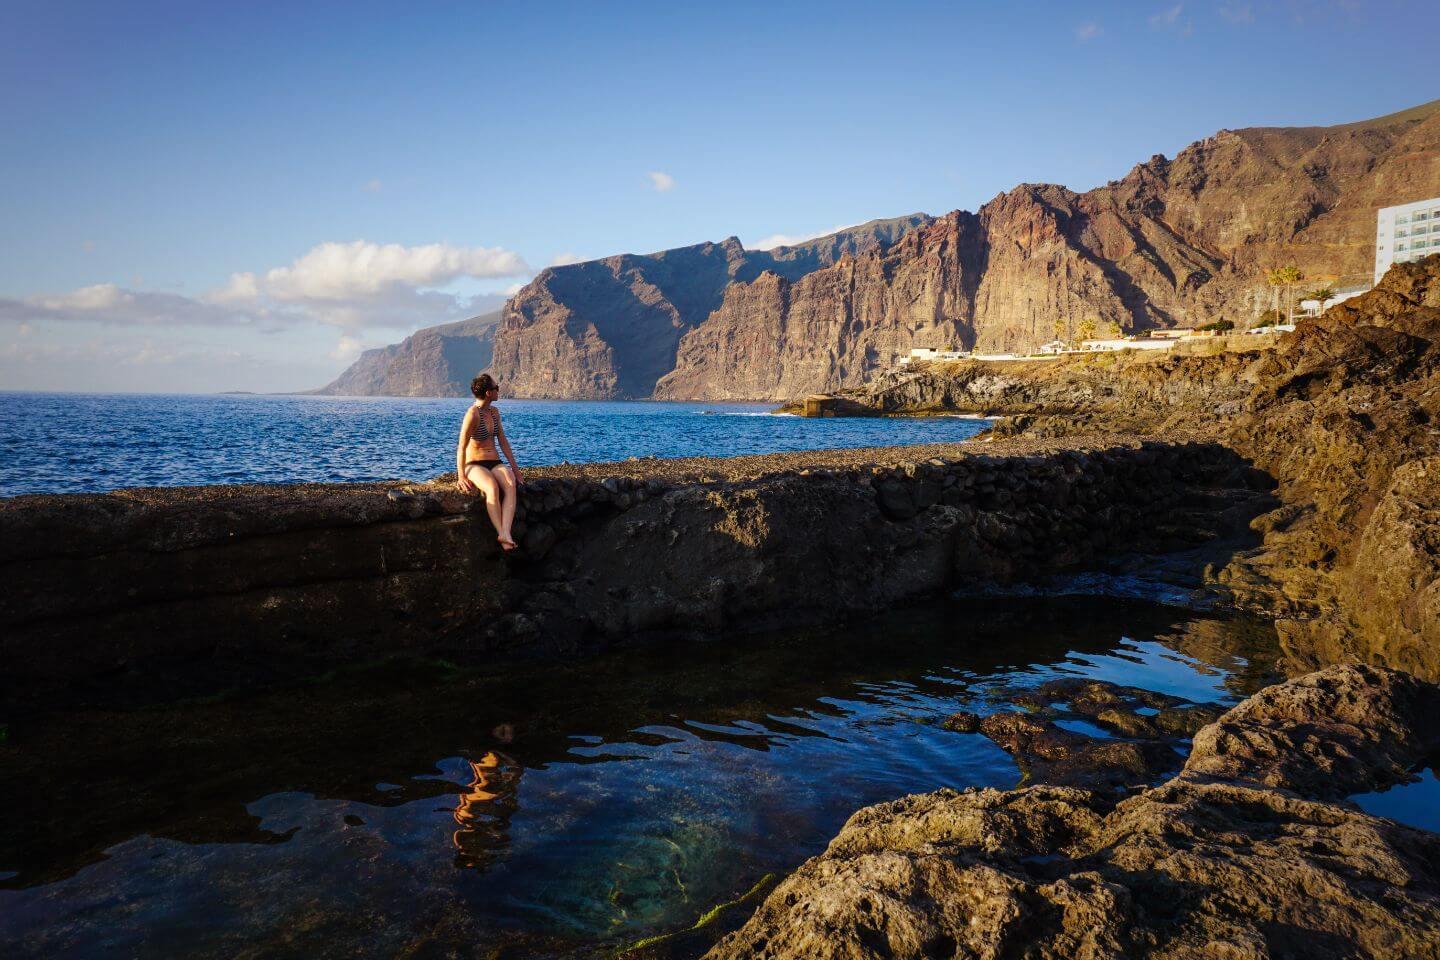 Los Gigantes, Where to Stay in Tenerife for Hiking - Canary Islands, Spain